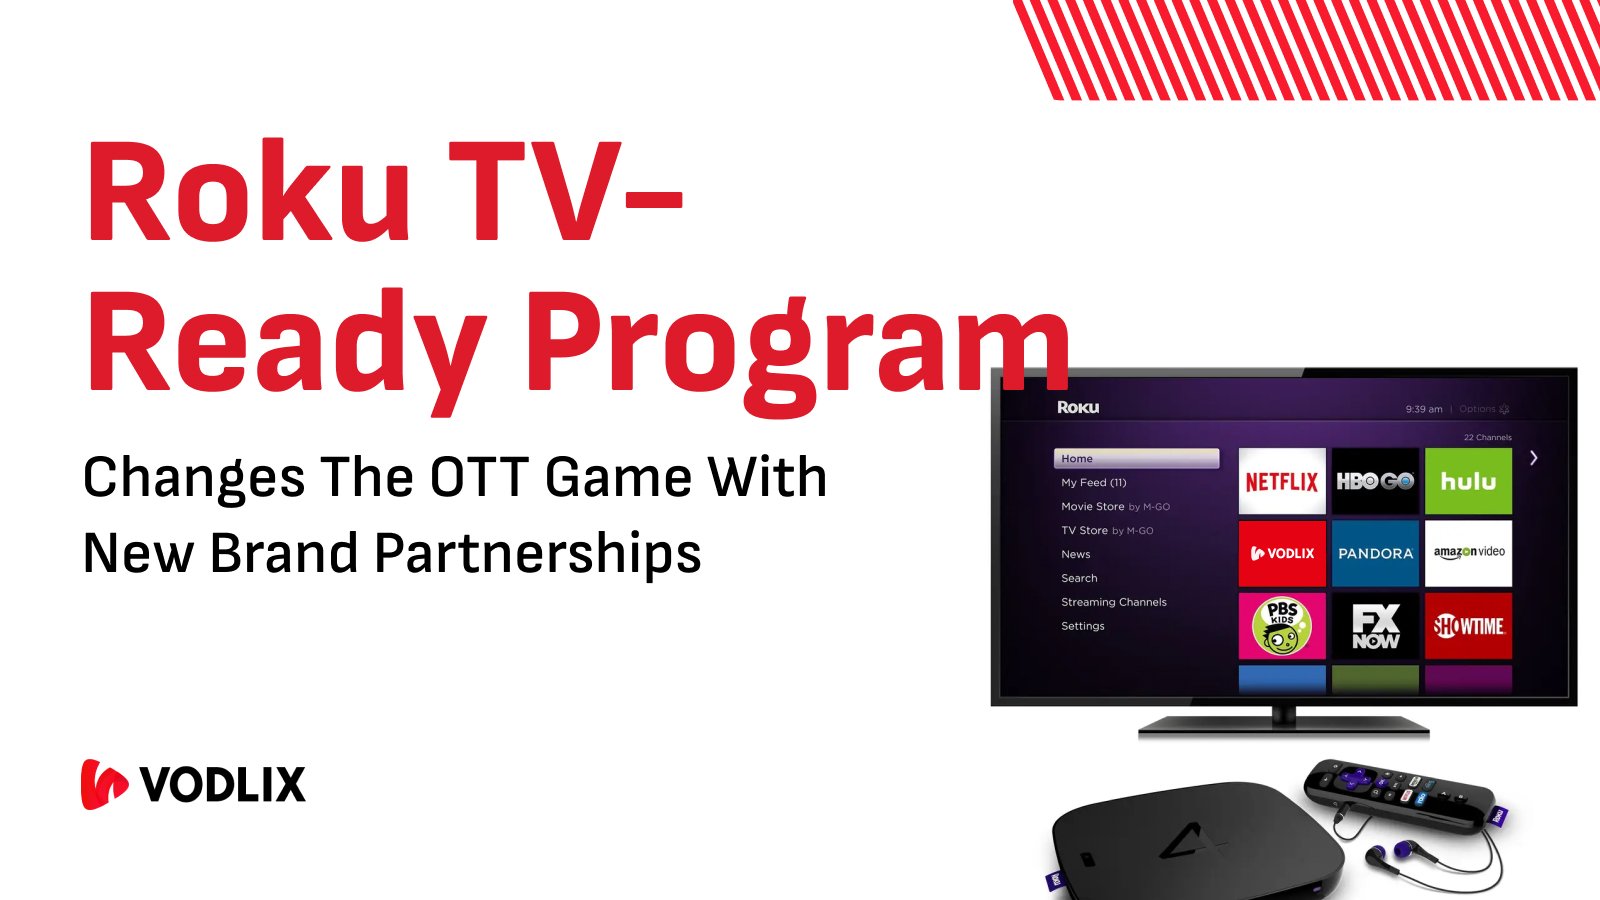 The Roku TV-Ready Program Changes the OTT Game With New Brand Partnerships